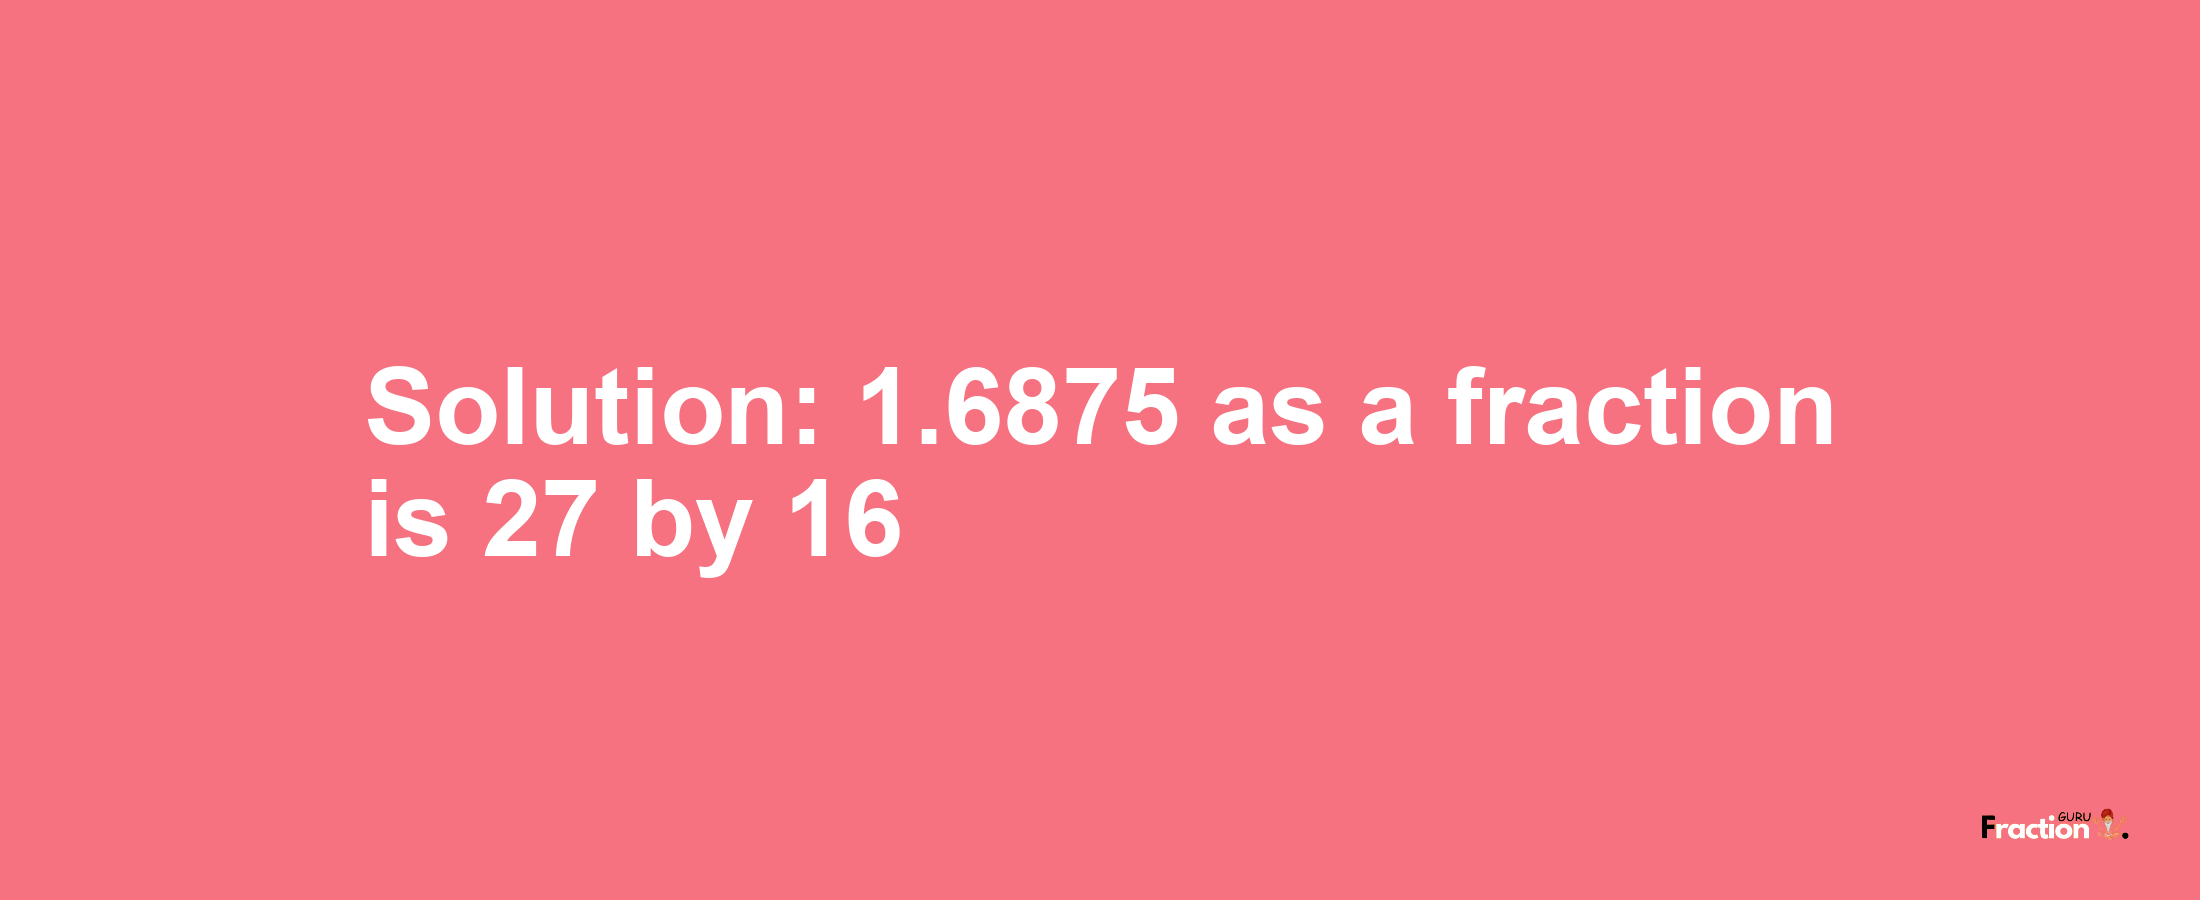 Solution:1.6875 as a fraction is 27/16